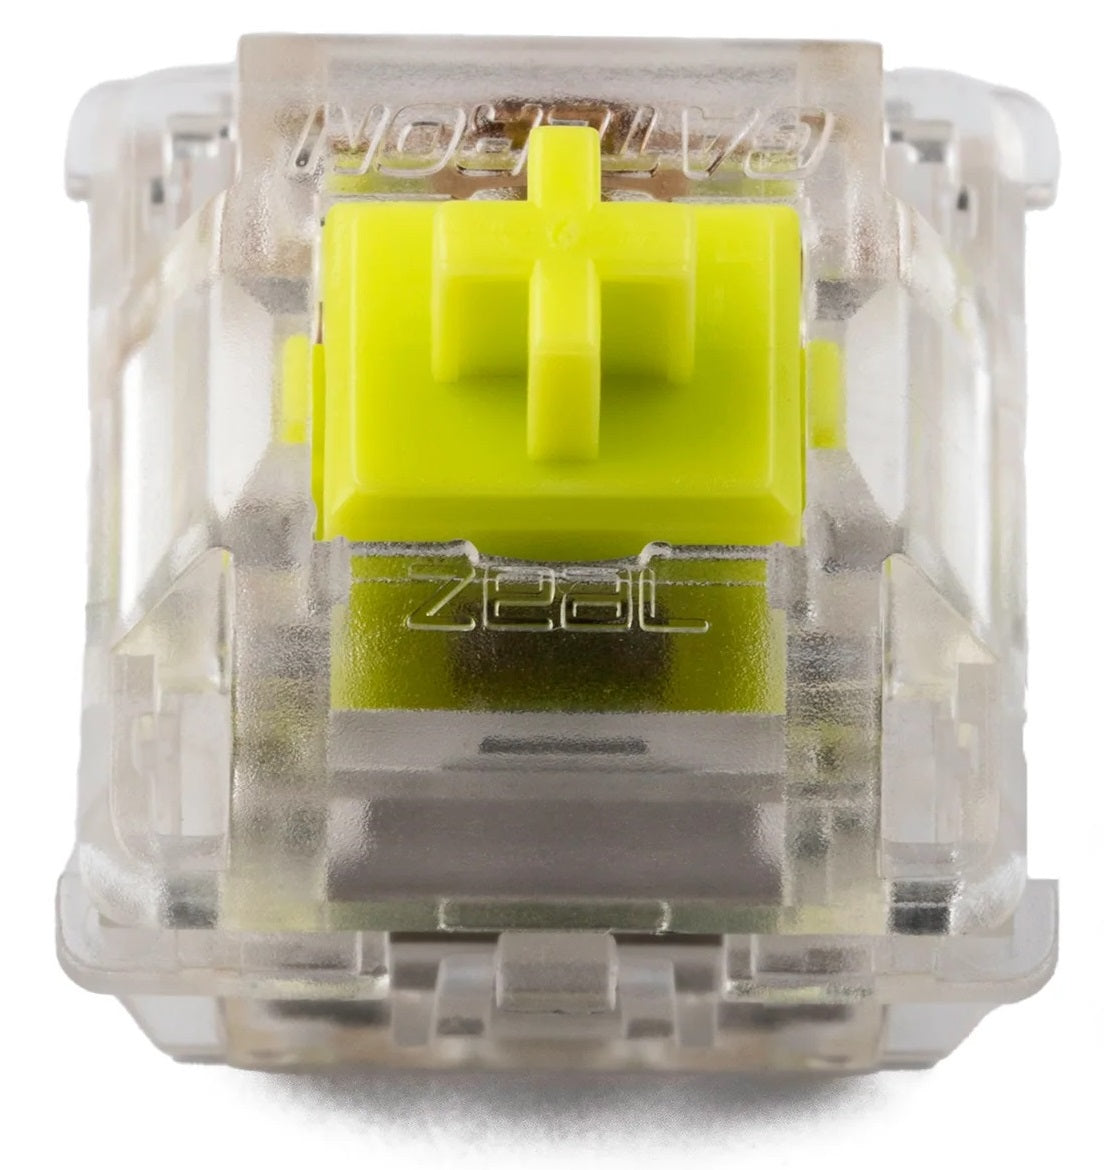 Zeal PC Zeal Clickiez 75g Convertible Tactile / Clicky / Linear PCB Mount MKQJ7HPAOX |0|